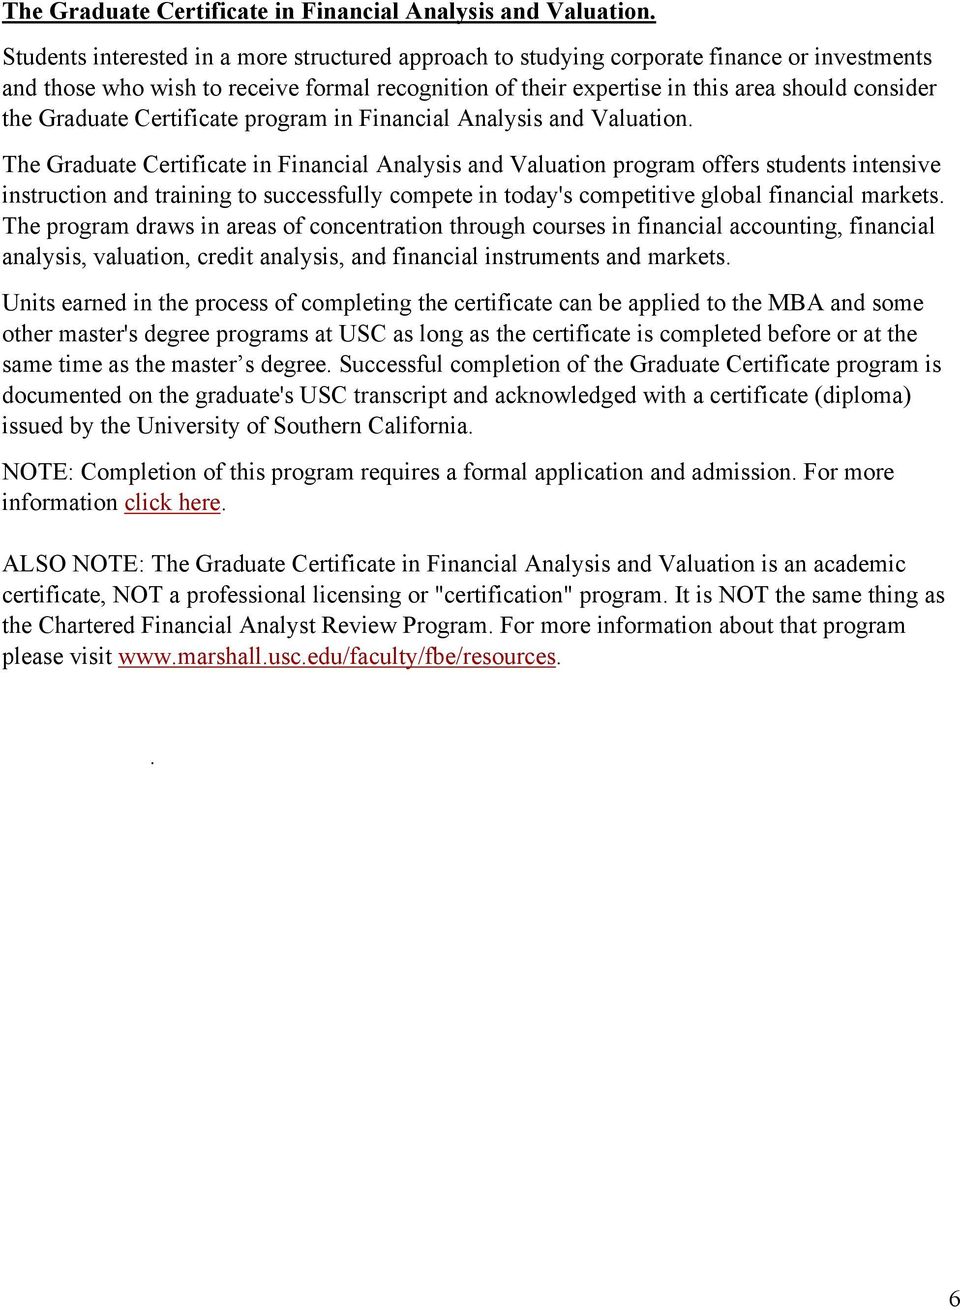 Graduate Certificate program in Financial Analysis and Valuation.